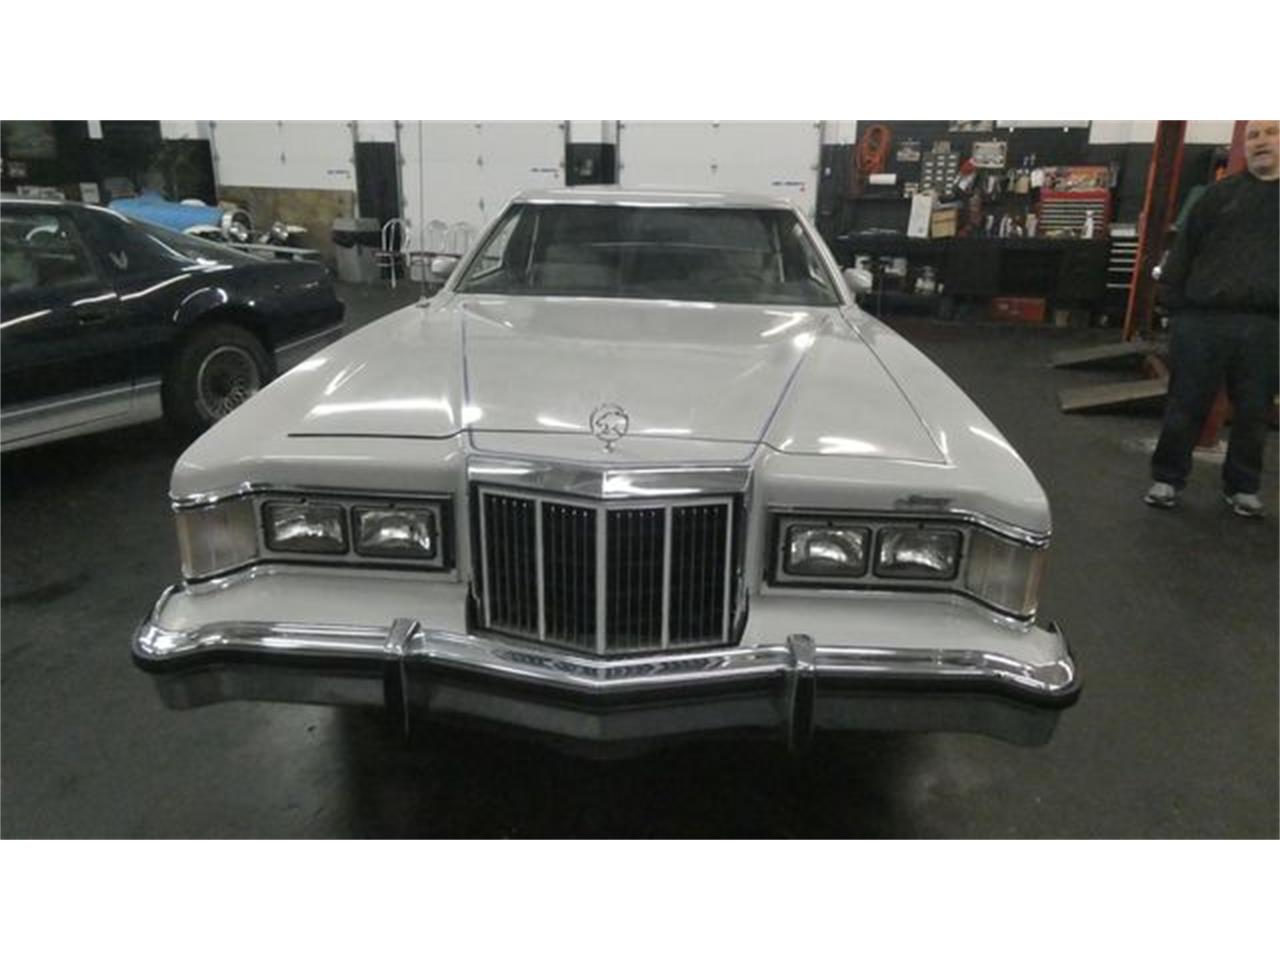 For Sale: 1979 Mercury Cougar in Colombus, Ohio for sale in Columbus, OH